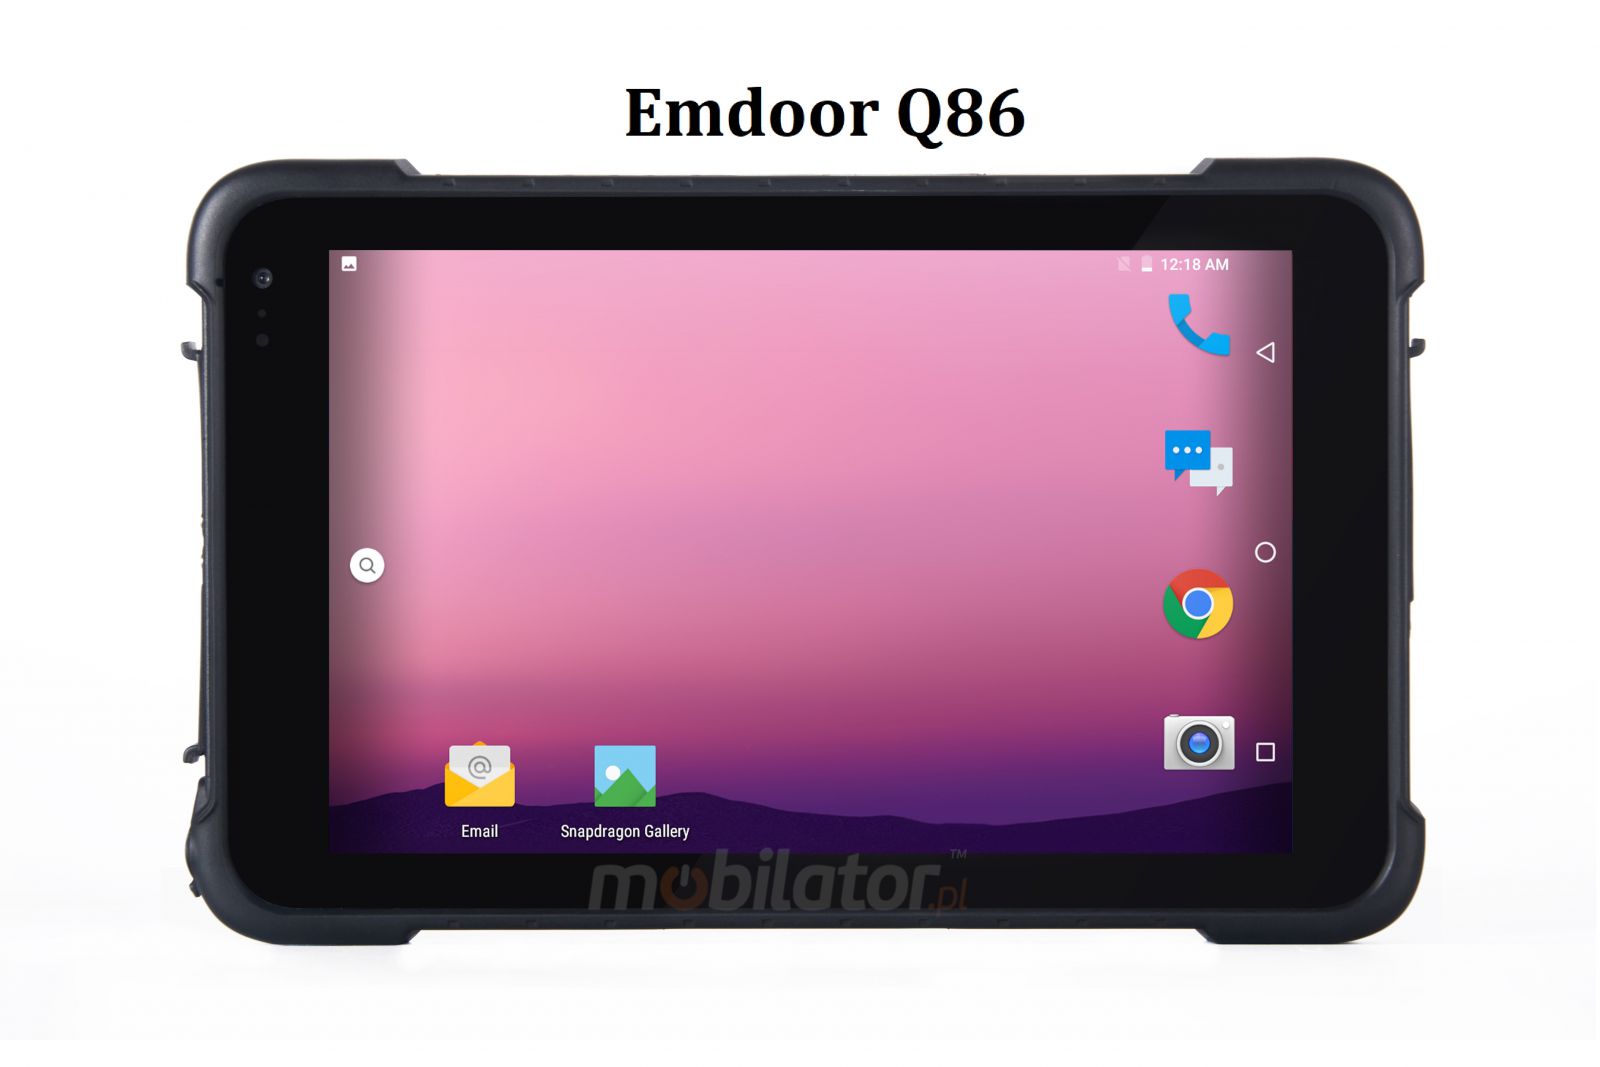 Rugged tablet with an octa-core processor, 4GB RAM memory, 64GB disk, NFC, 800nits screen - Emdoor Q86 v.2 